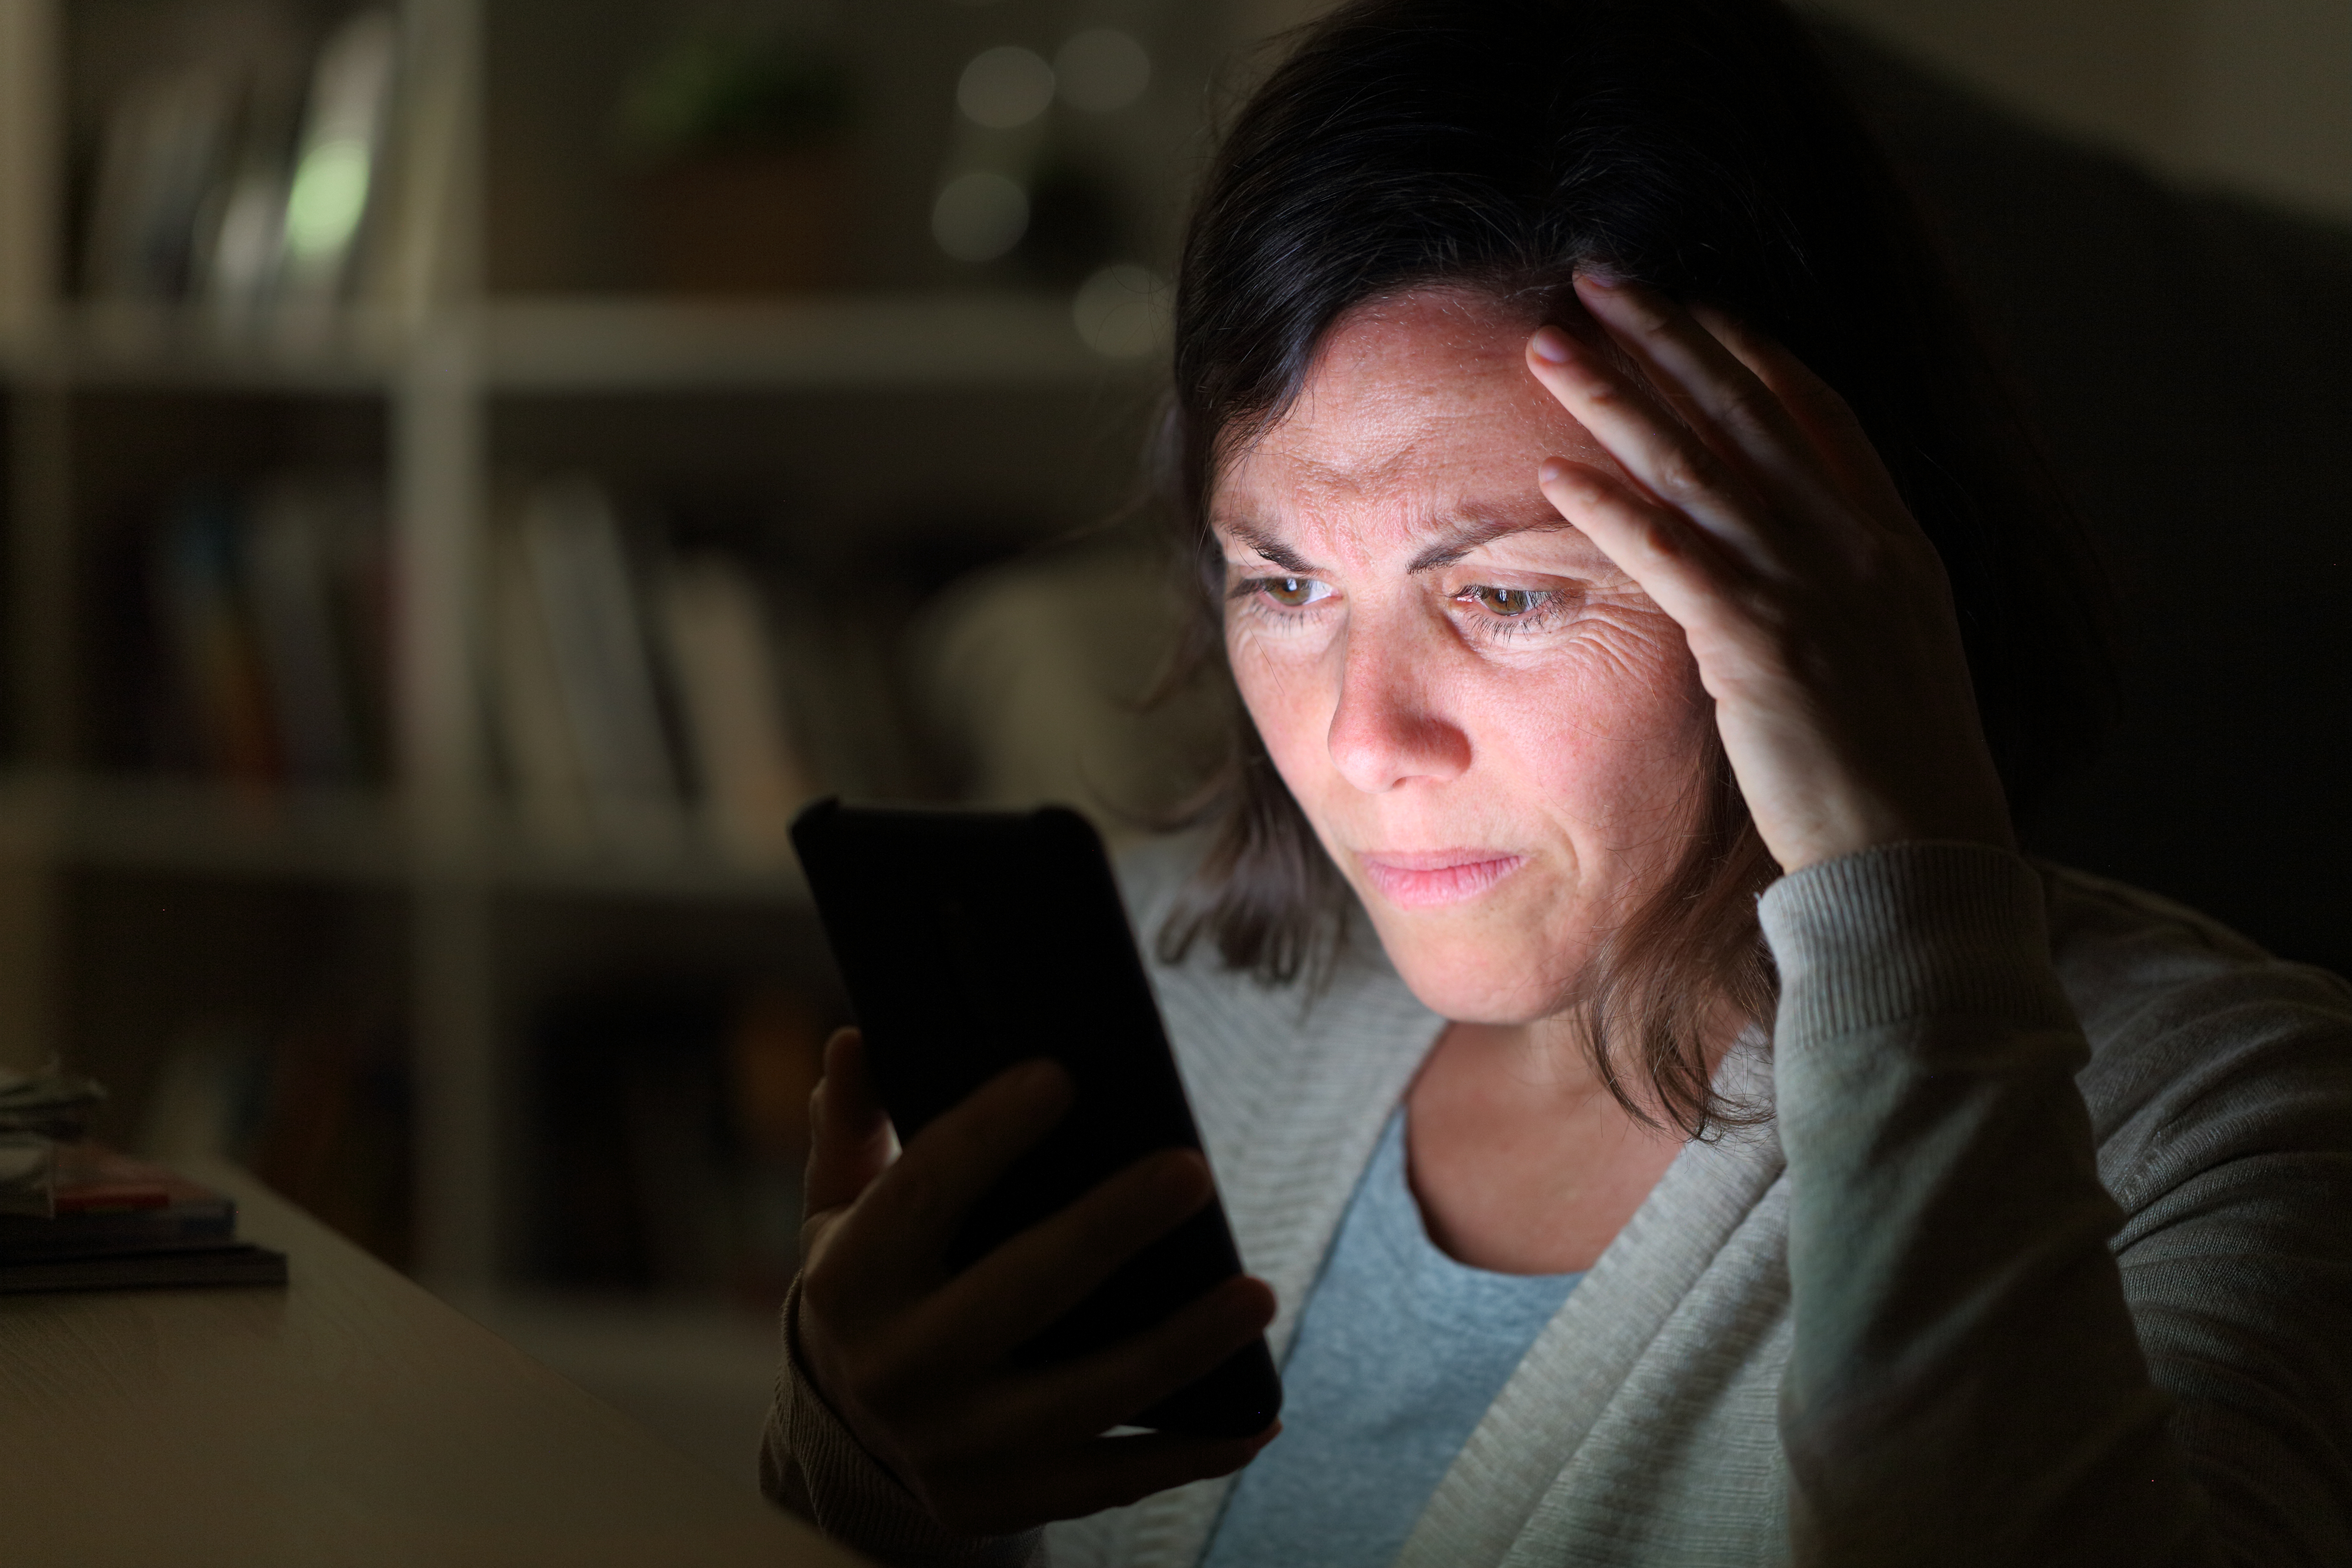 A concerned woman is looking at her cell | Source: Shutterstock